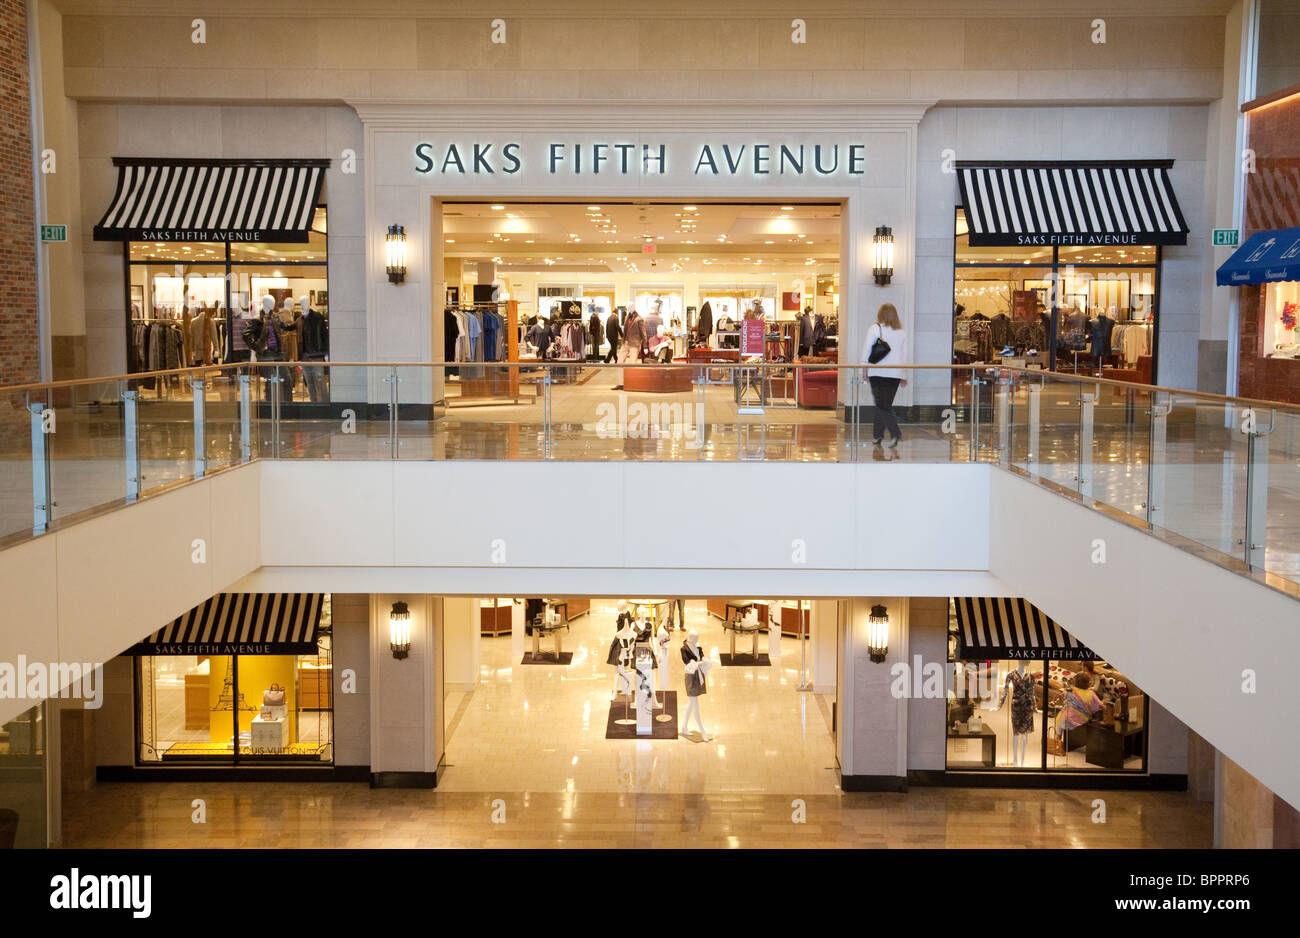 saks fifth ave